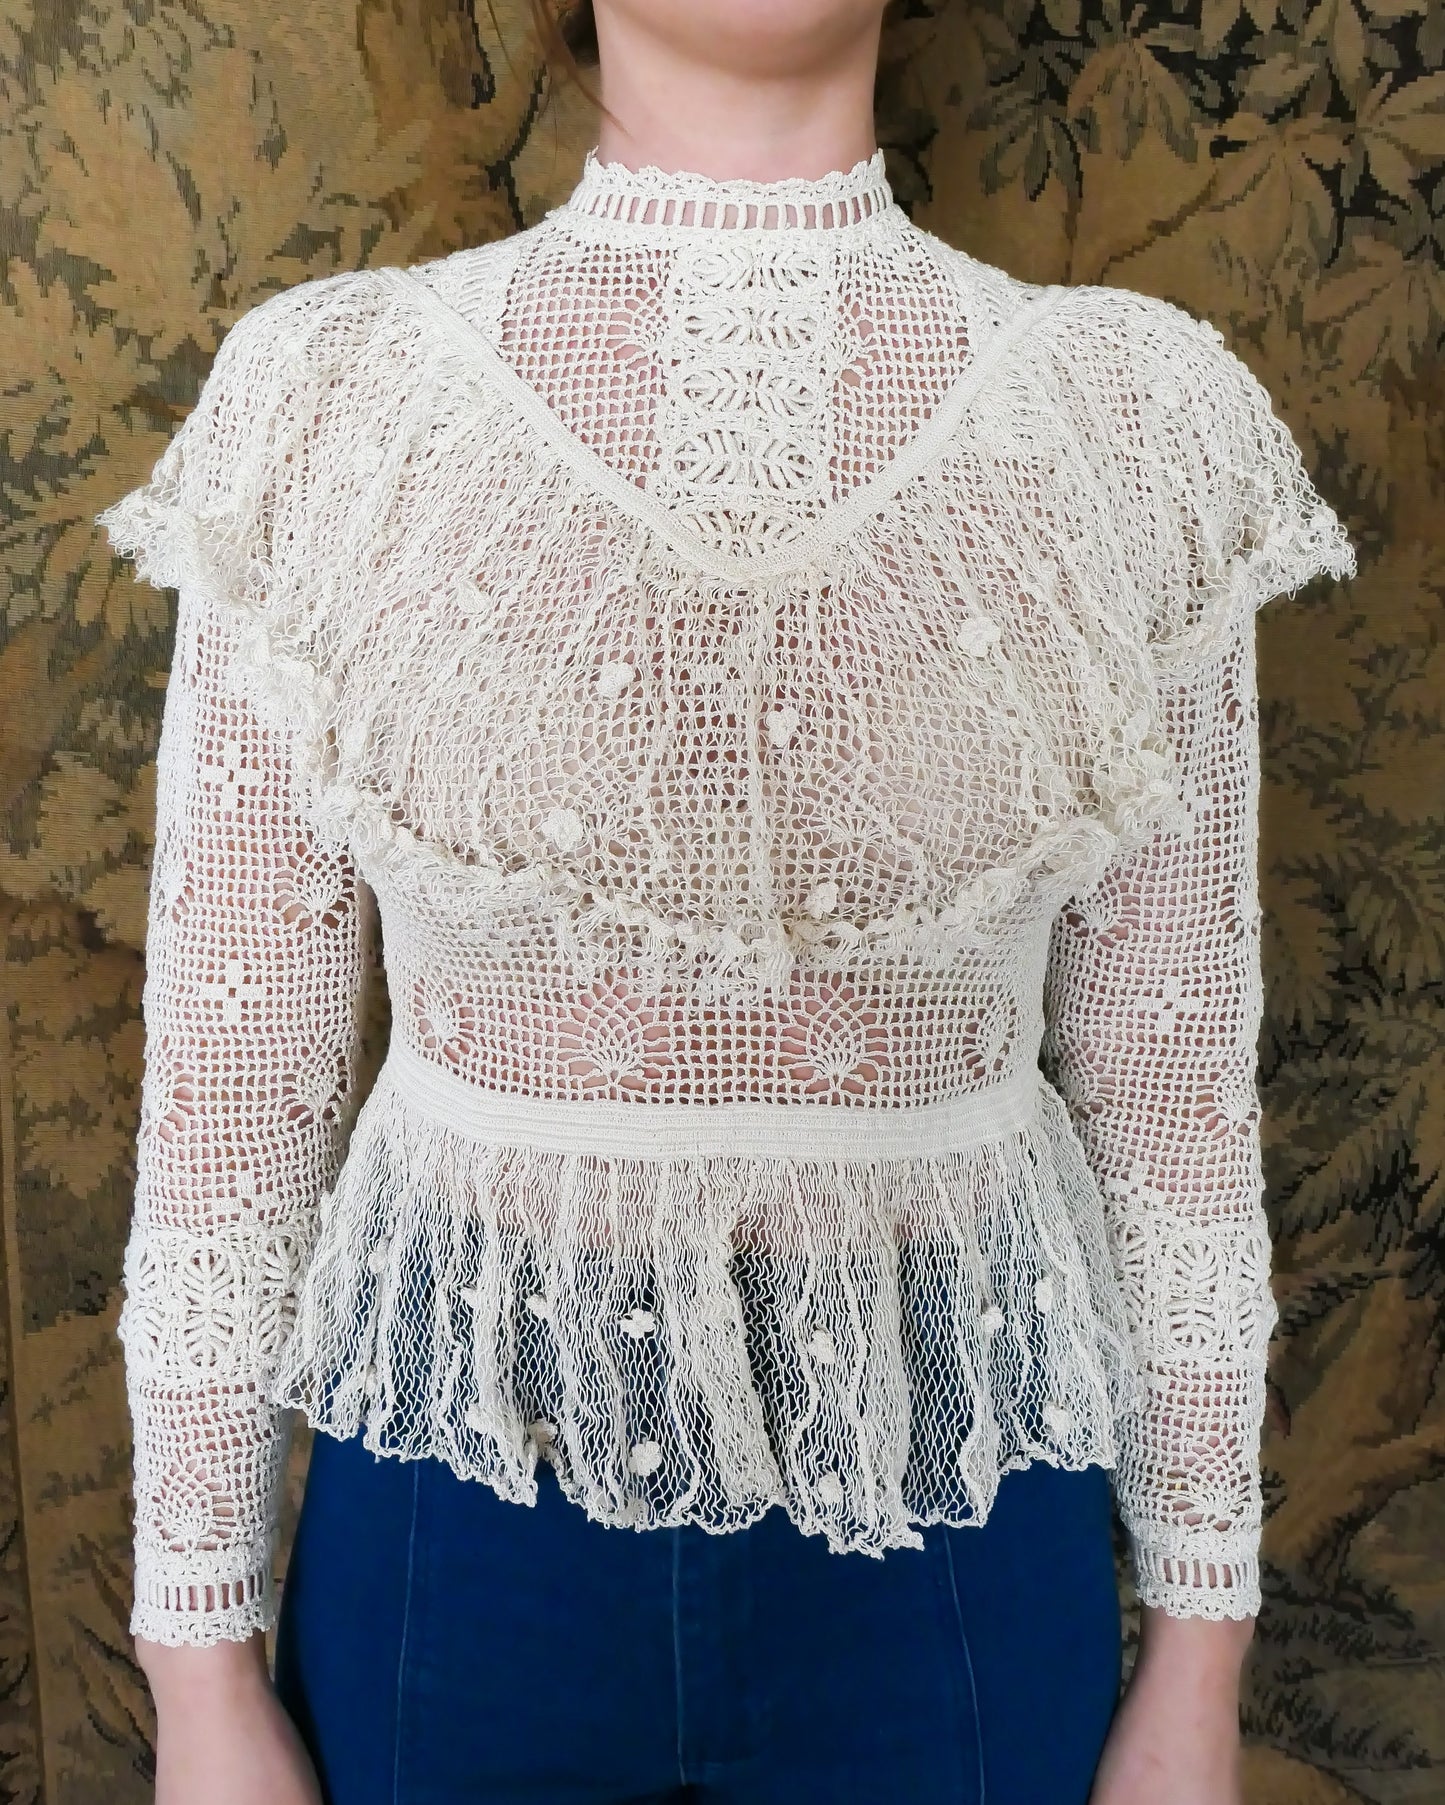 A Lim's original crochet top from the 1980s. Slightly thicker threads were used to crochet the body of the top, and very fine threads give the ruffled parts a lightweight, feminine touch. High Victorian neckline, a beautiful, intricate trim on the sleeves and chest, and a fitted waist and flared hem to create a flattering silhouette.  The top is reversible and can be worn with the buttons going down the front or back. This is truly one-of-a-kind, vintage, and our last available piece left!  Natural color. 